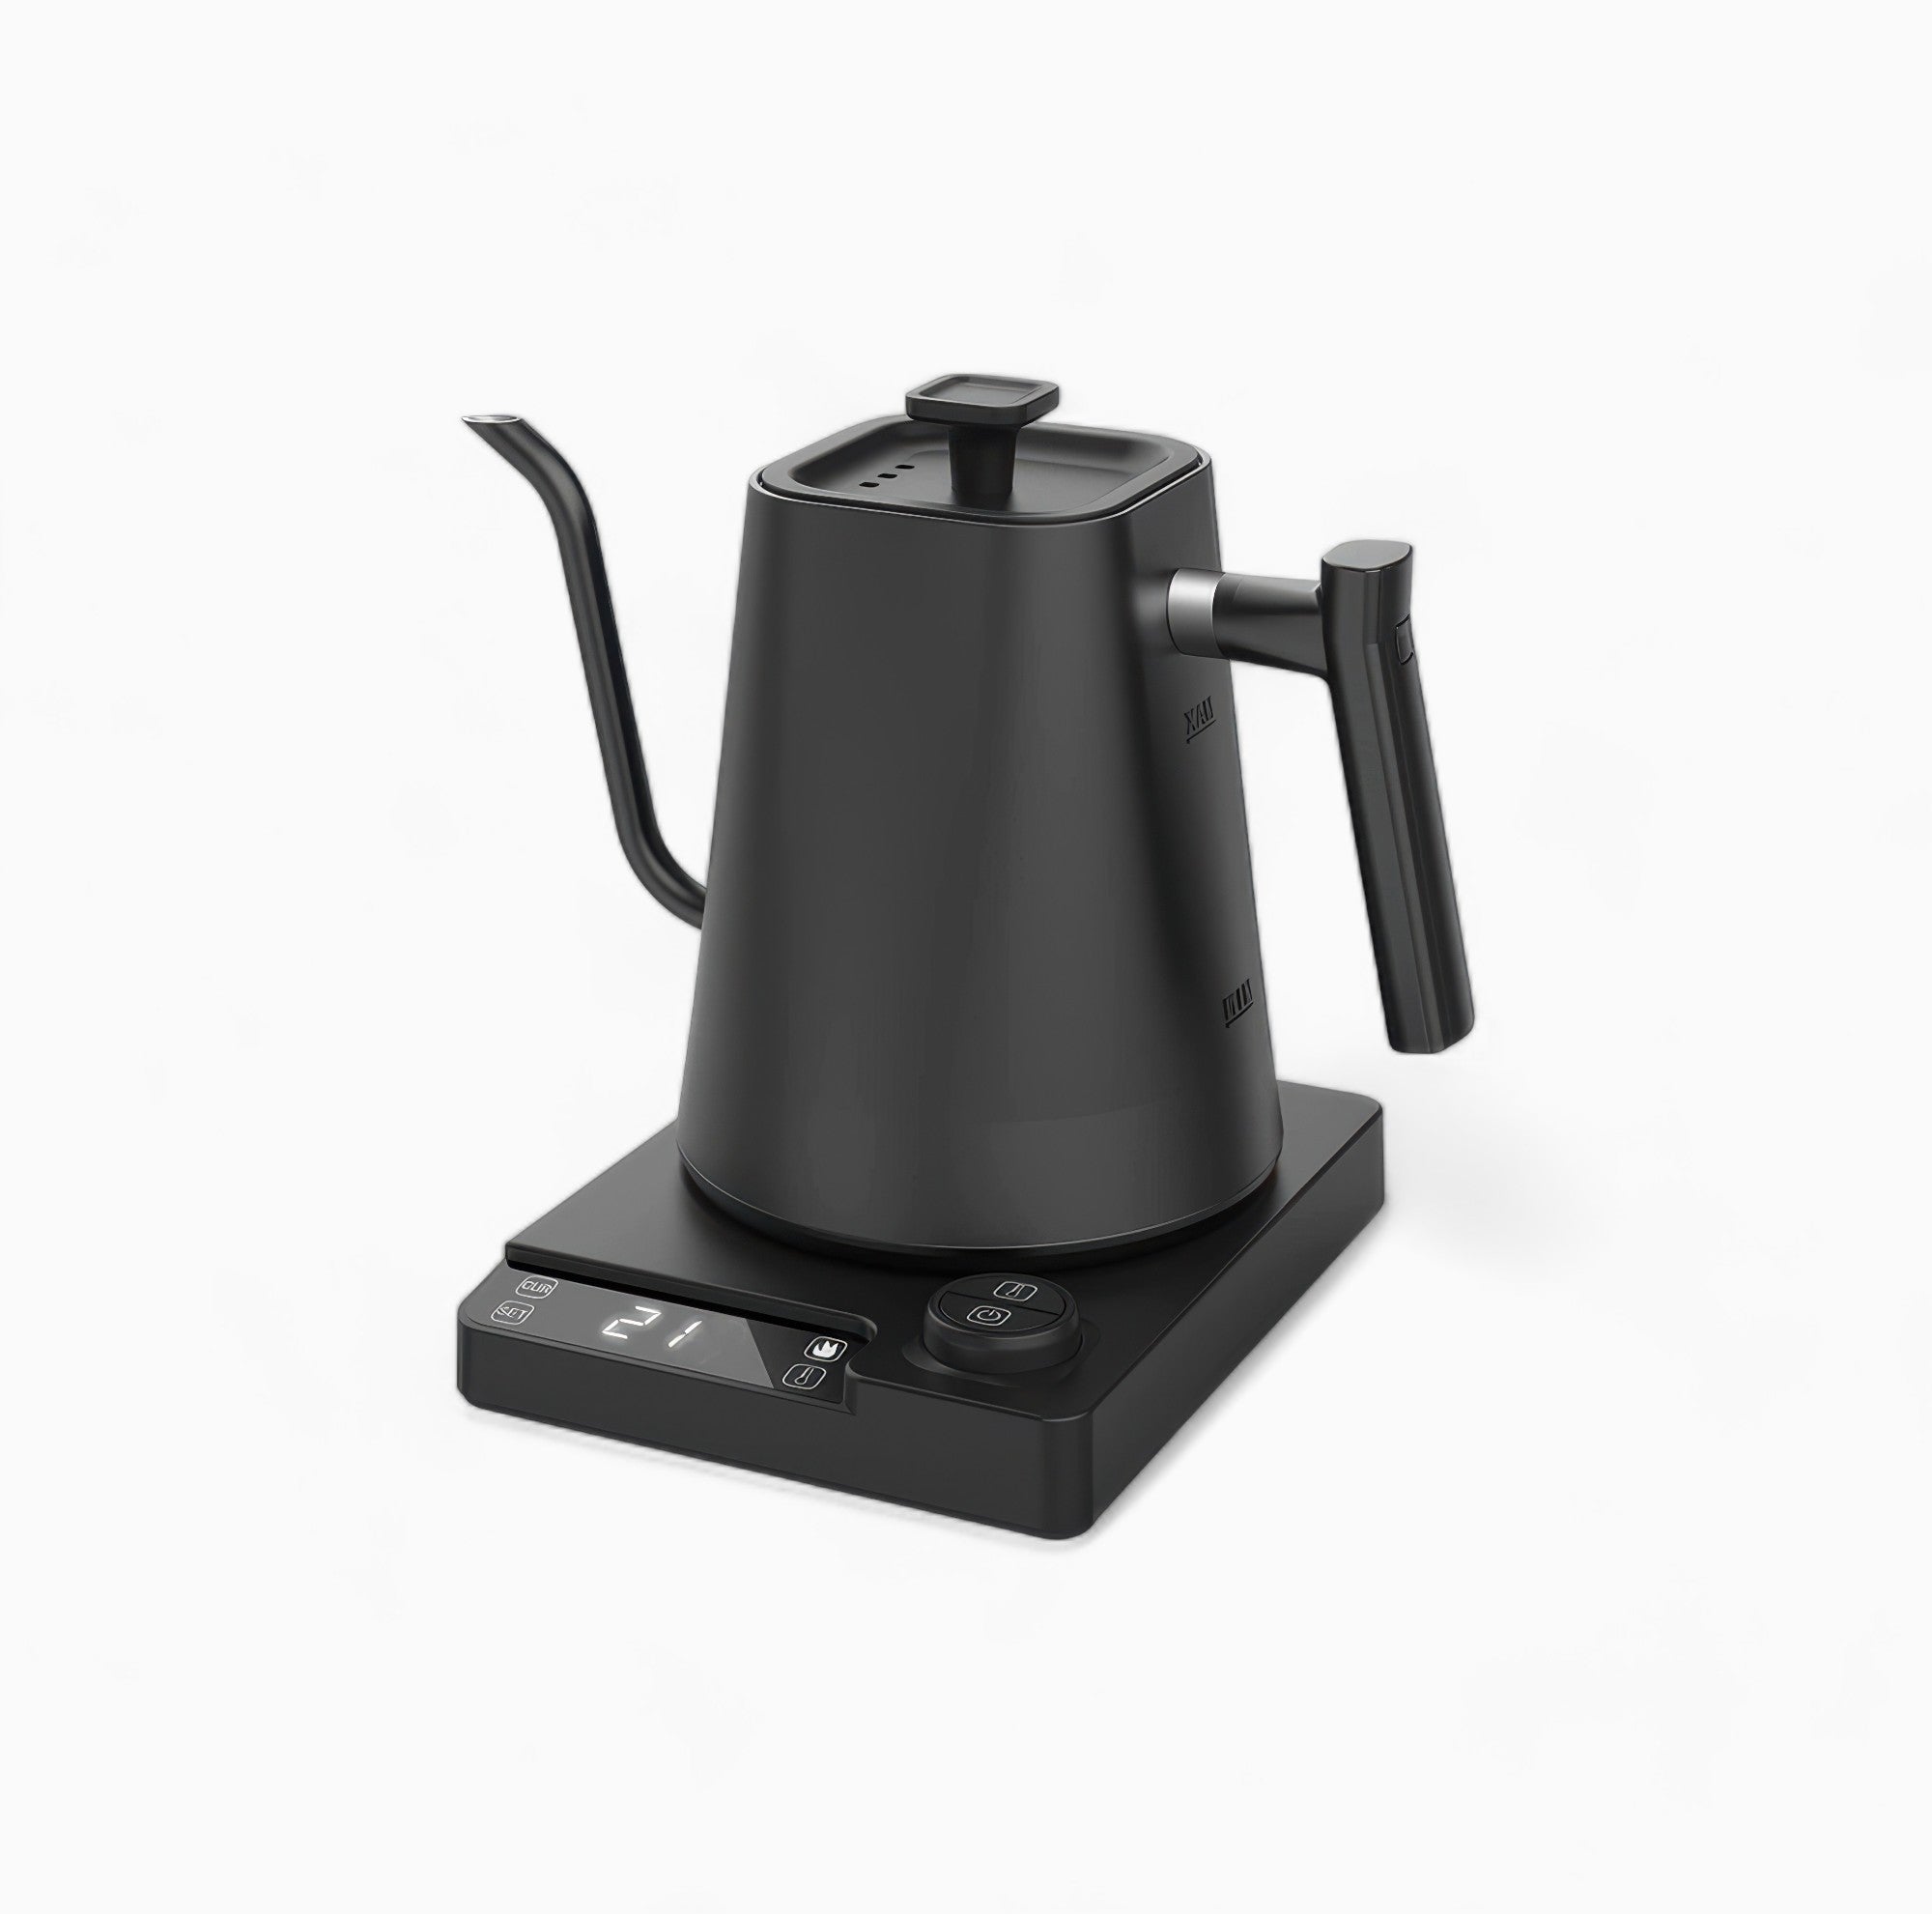 German Electric Kettle with Constant Temperature Control for Hand Brewing Coffee